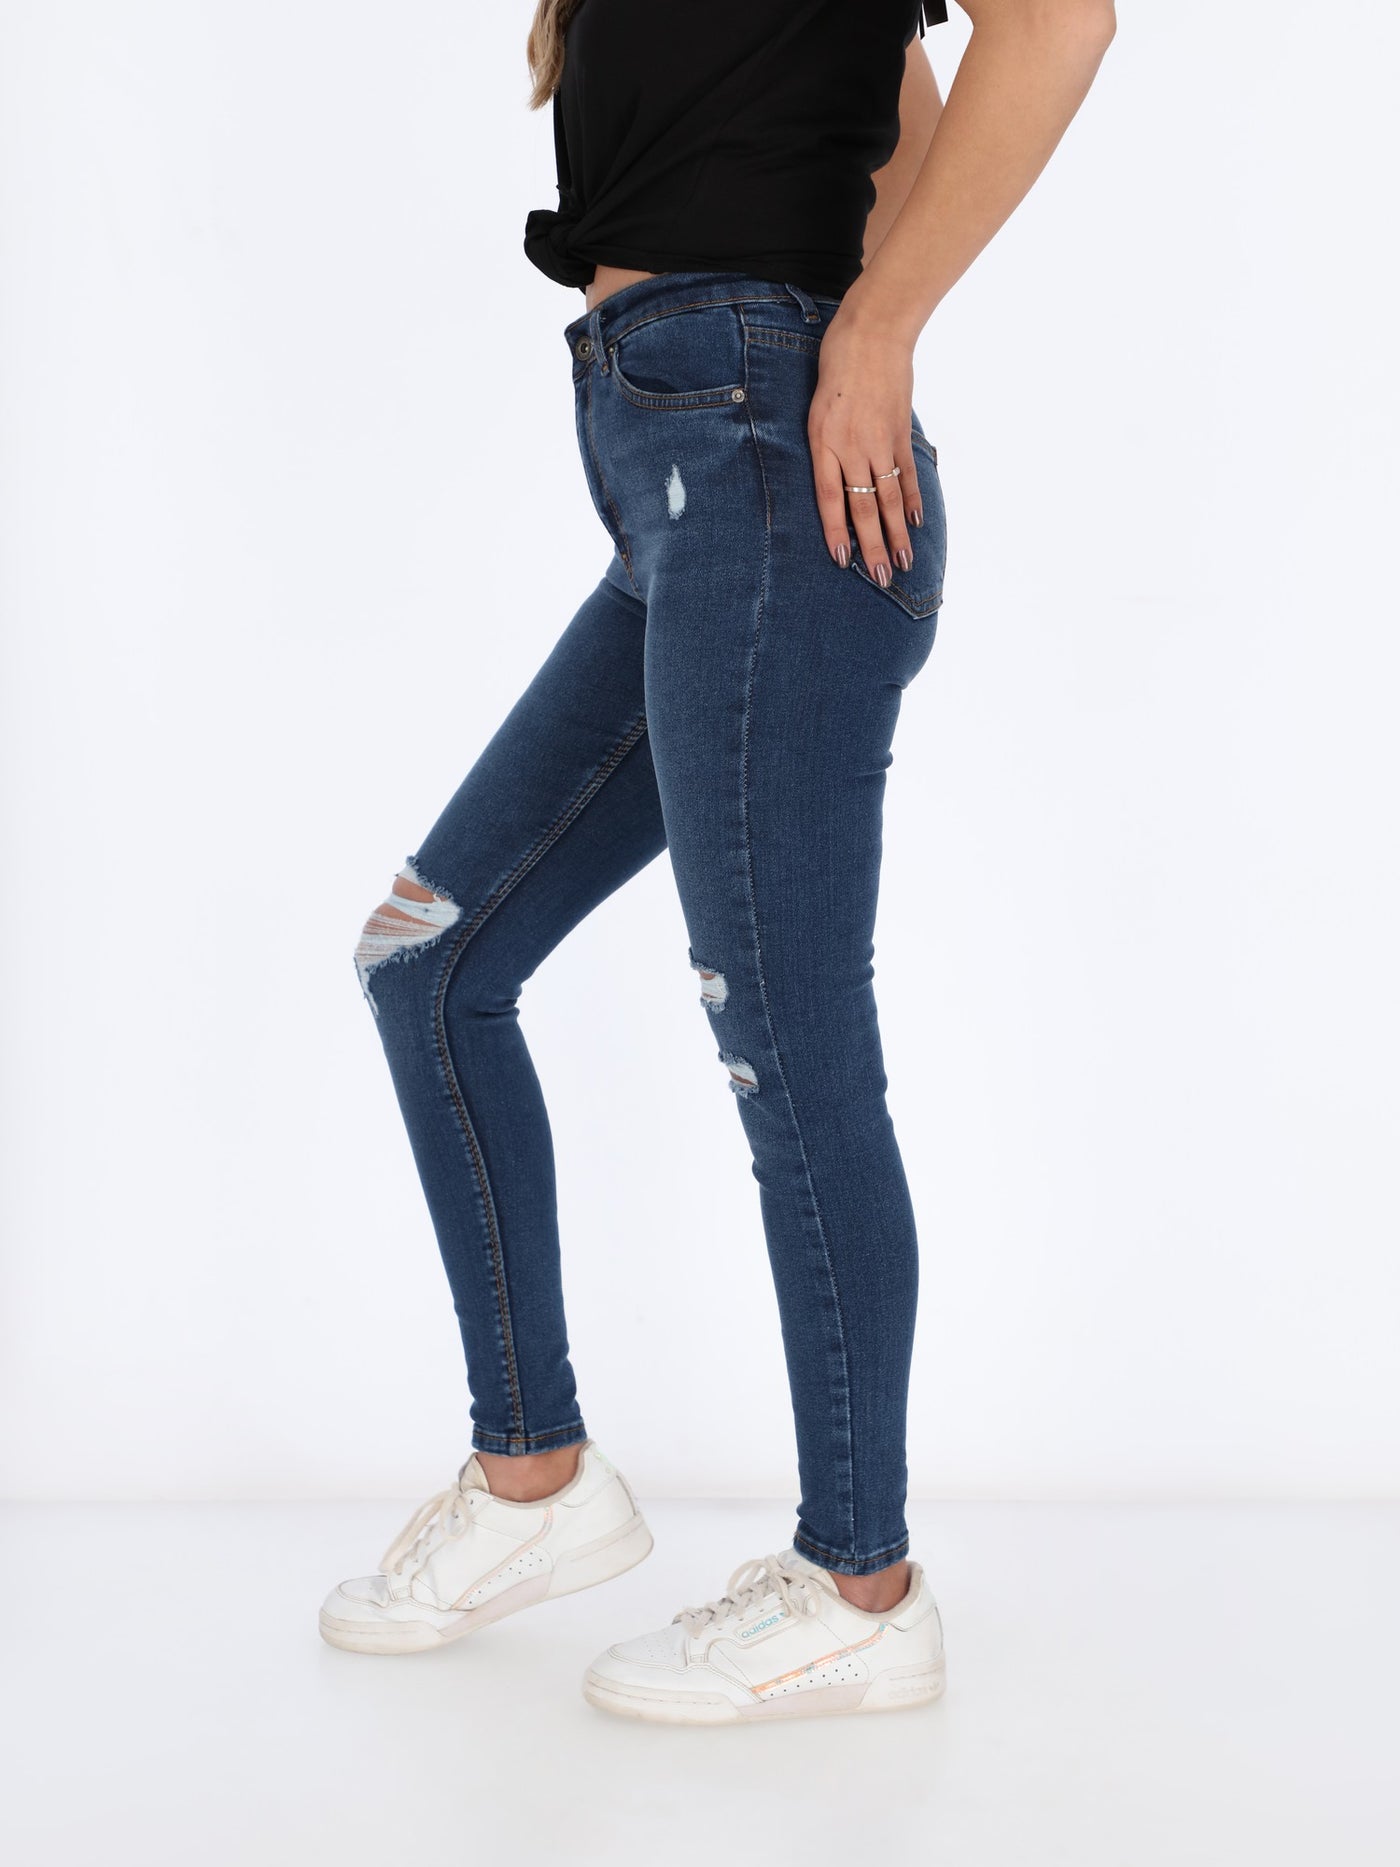 OR Women's Ripped Jeans